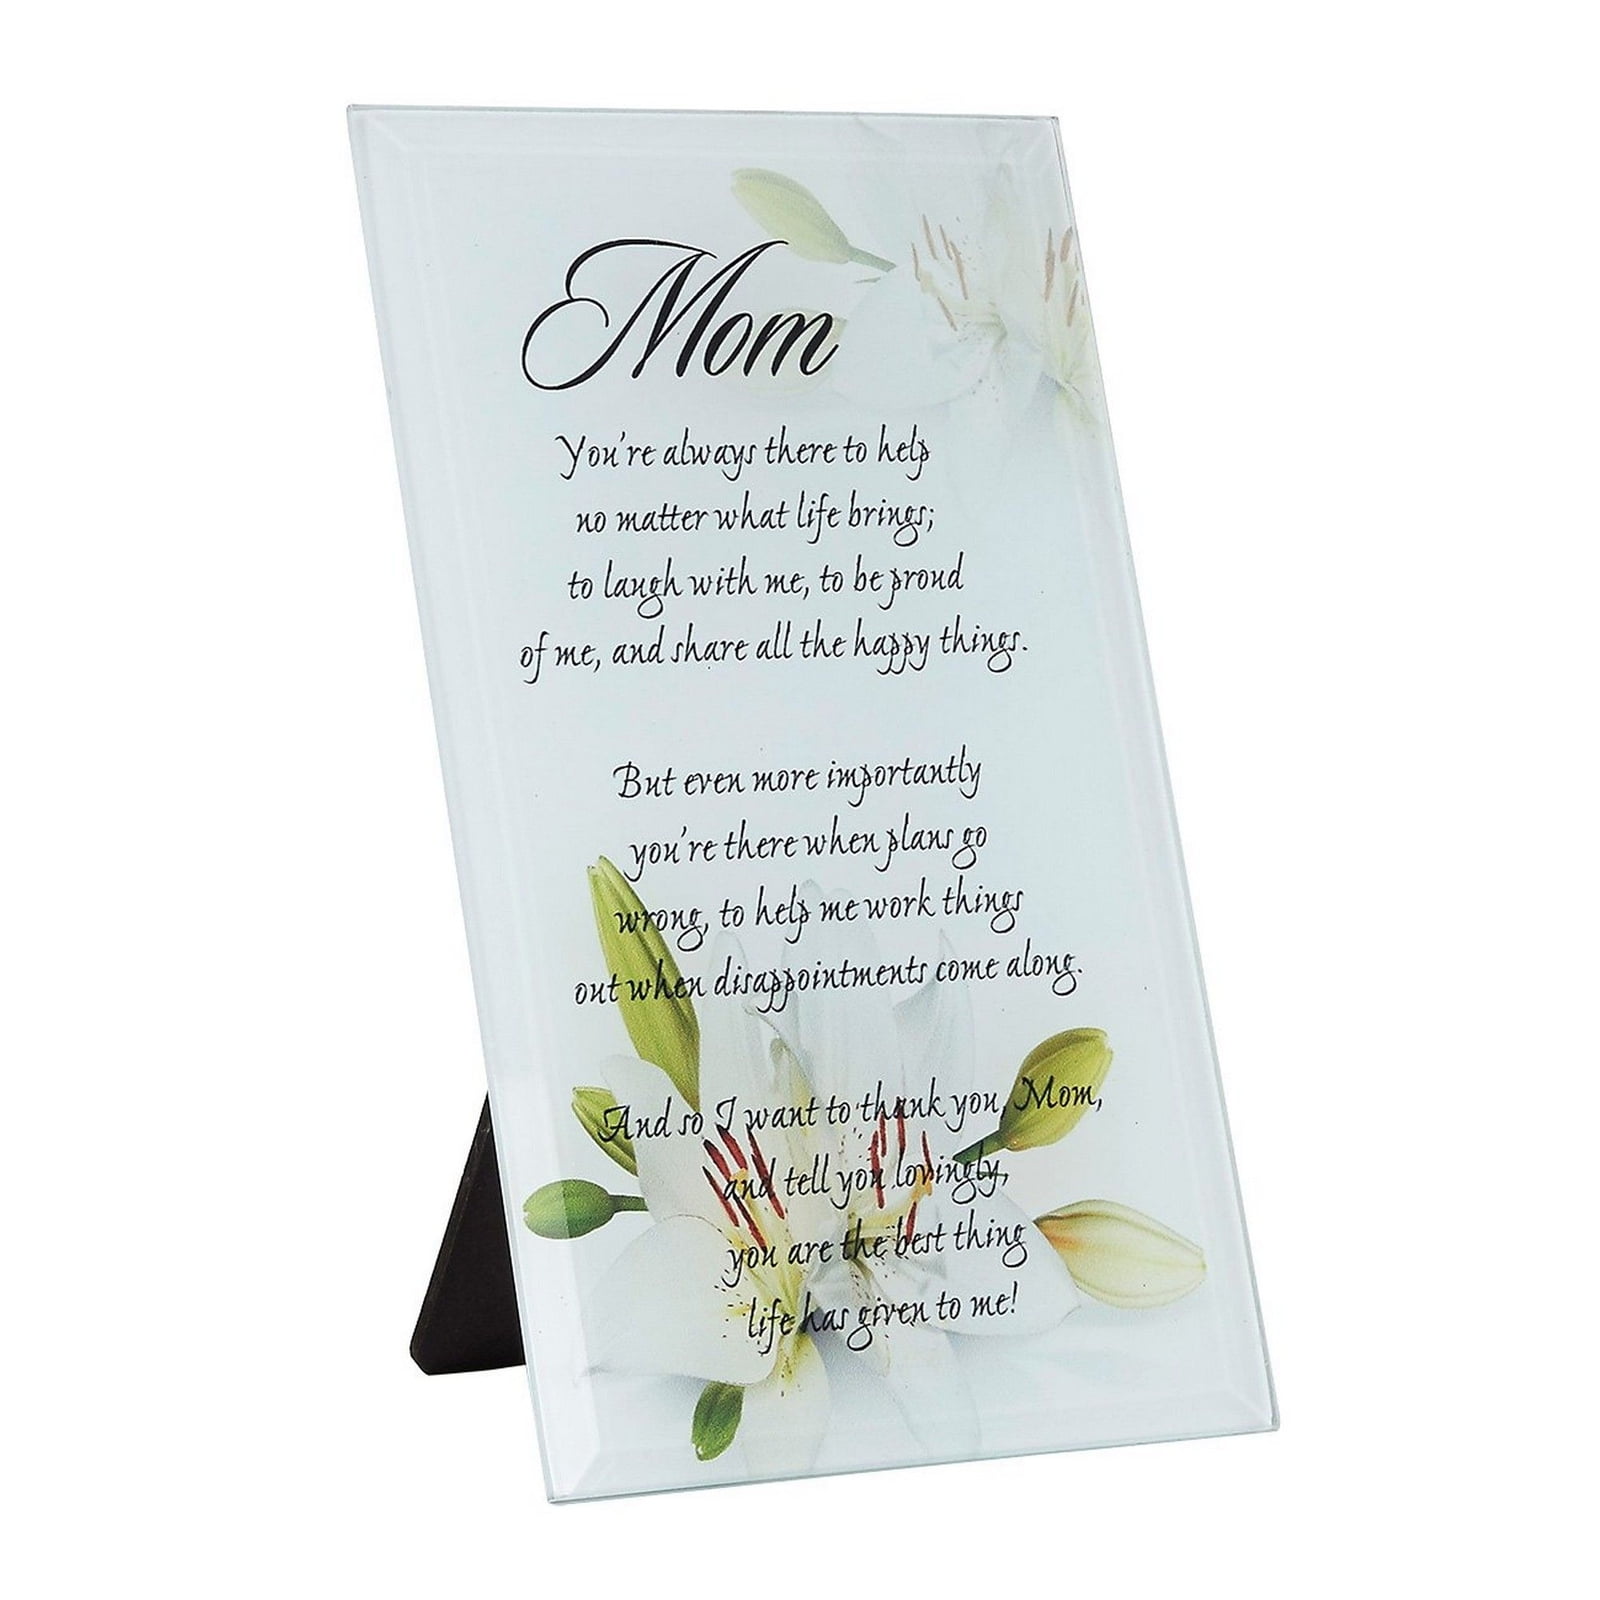 Easel Back Classic Horizontal Tabletop Decoration Dear God I Gratefully Thank You for Giving me My dad Prayer for My Dad Glass Plaque with Inspiring Quotes 4 inches x 6 inches 